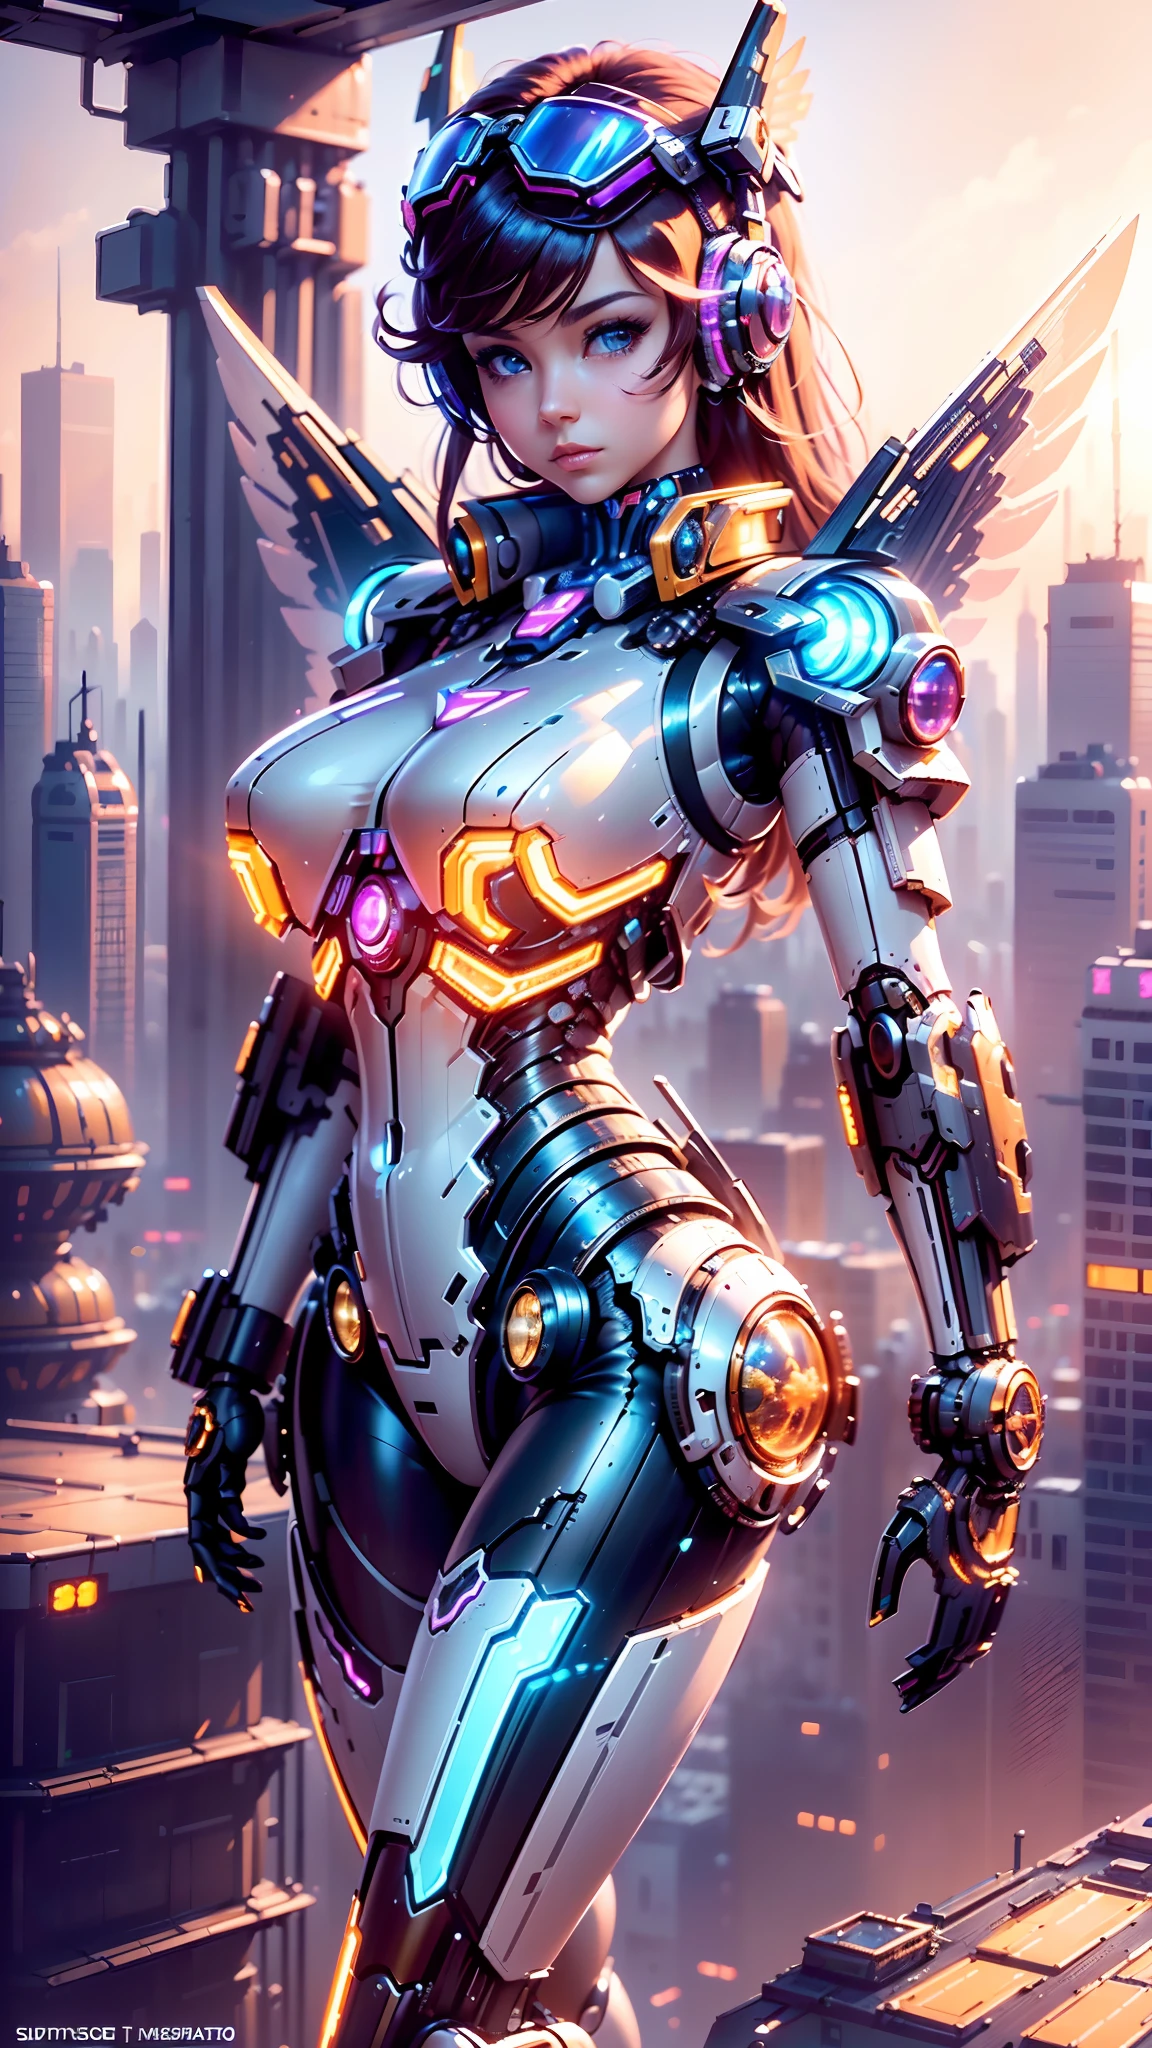 tmasterpiece，best qualtiy，highest  quality，ultra - detailed，Best resolution，8K，CG，illustration，realisticlying，aerial perspective，(Surrealist tech metropolis:1.2)，(The mech girl flew over the city:1.2)，(Mechanical wings with a sense of technology:1.3)，Transparent Goggles，Glowing tech mech